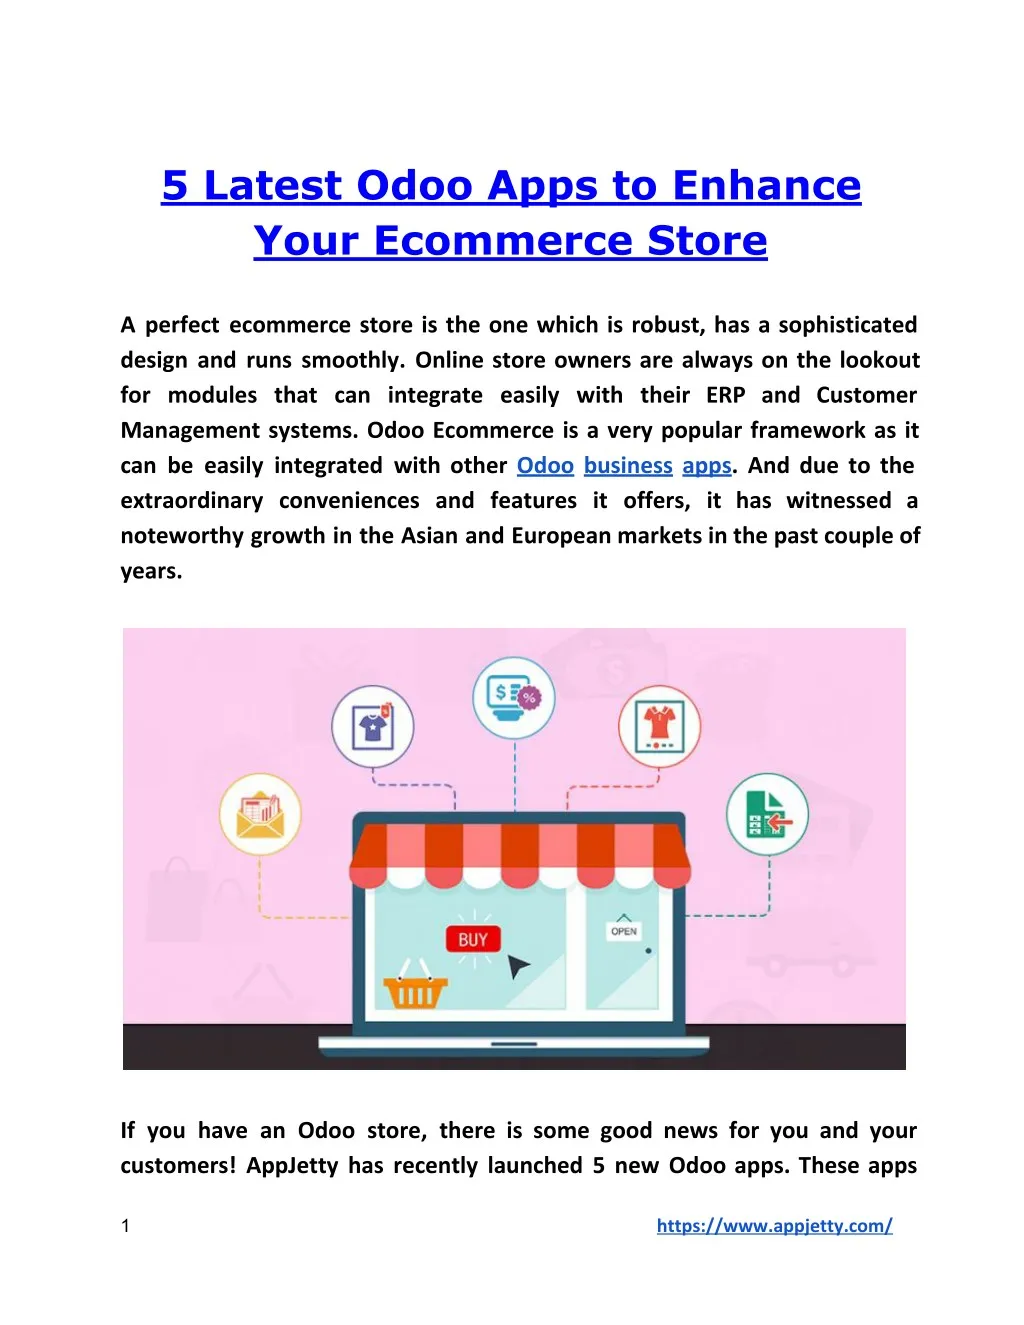 5 latest odoo apps to enhance your ecommerce store